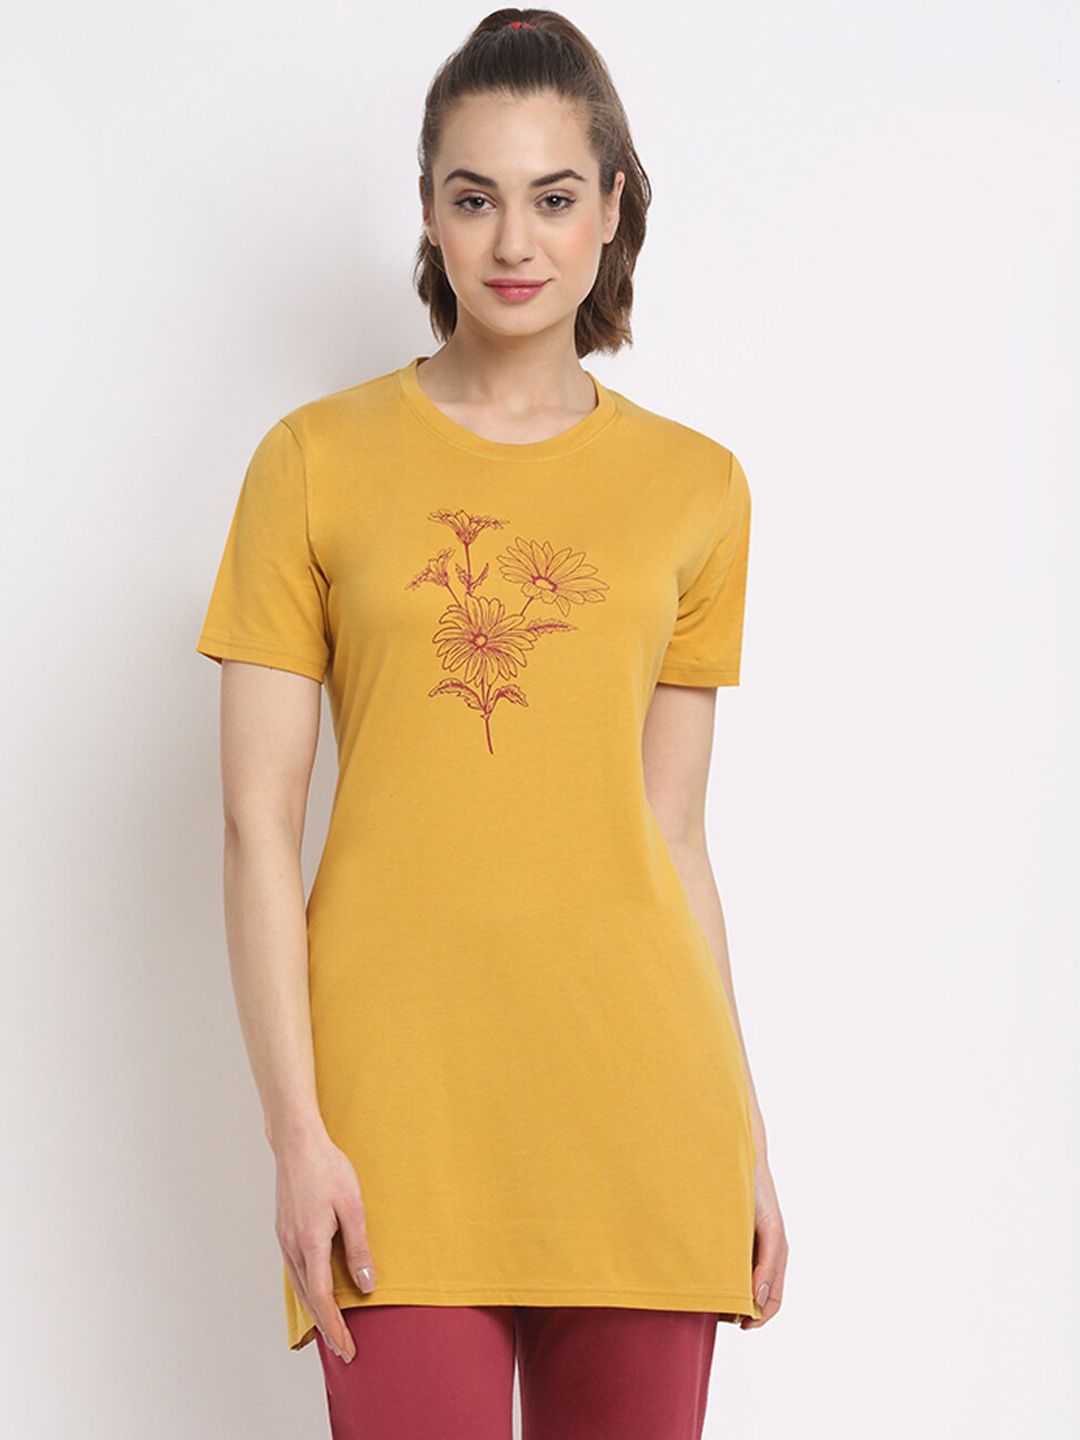 Kanvin Women Gold-Colored Printed Lounge T-shirt Price in India